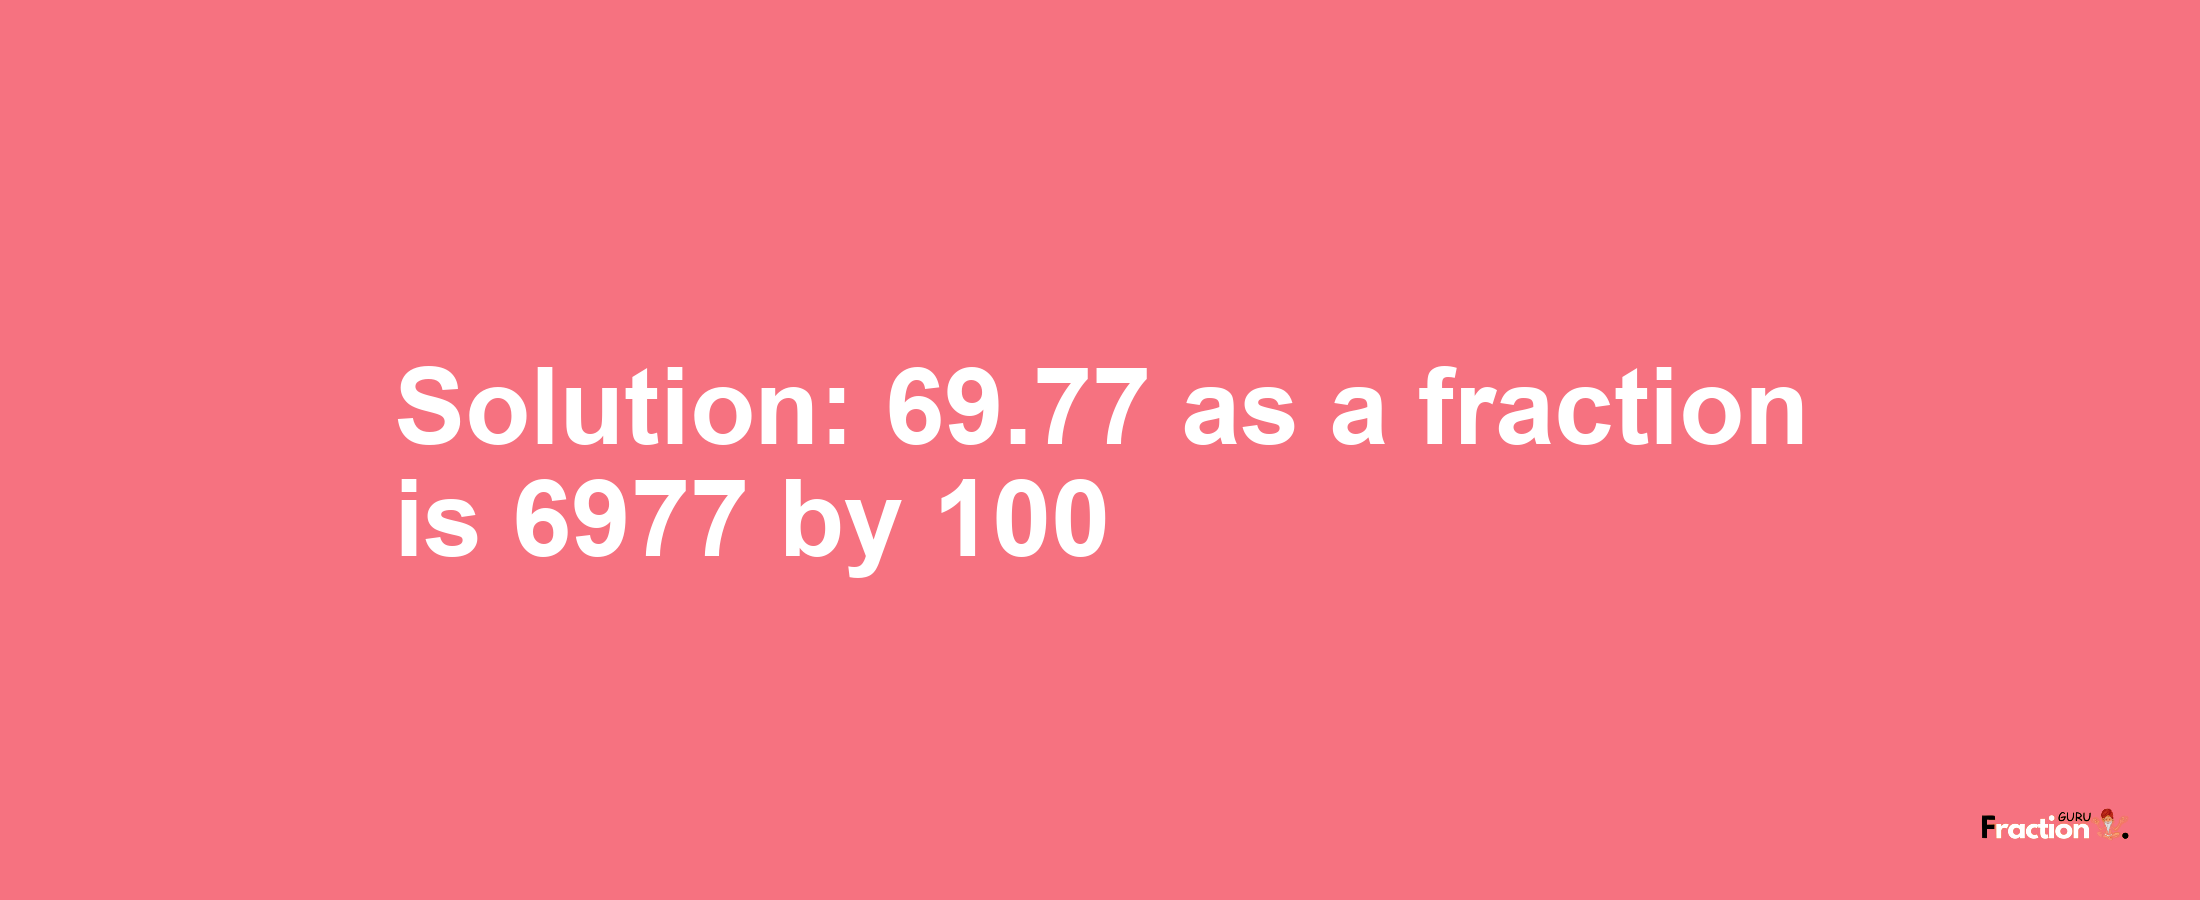 Solution:69.77 as a fraction is 6977/100